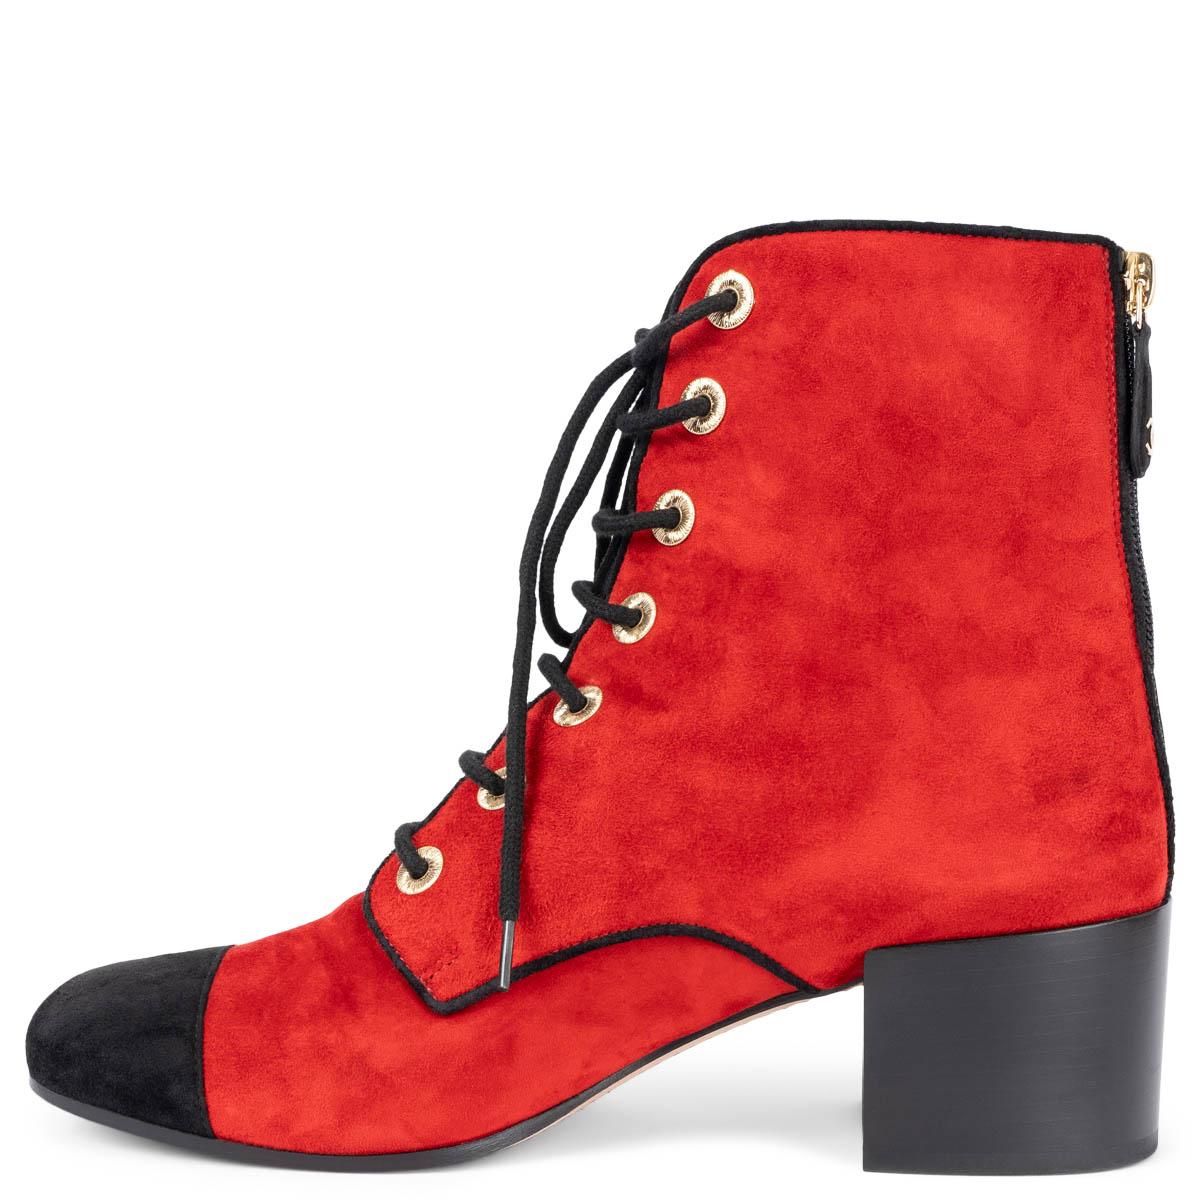 100% authentic Chanel block-heel lace-up boots in red suede with black cap toe. The design features textured gold-tone shoelace eyelets and a CC logo zipper on the heel. Have been worn and are in excellent condition. 

2019